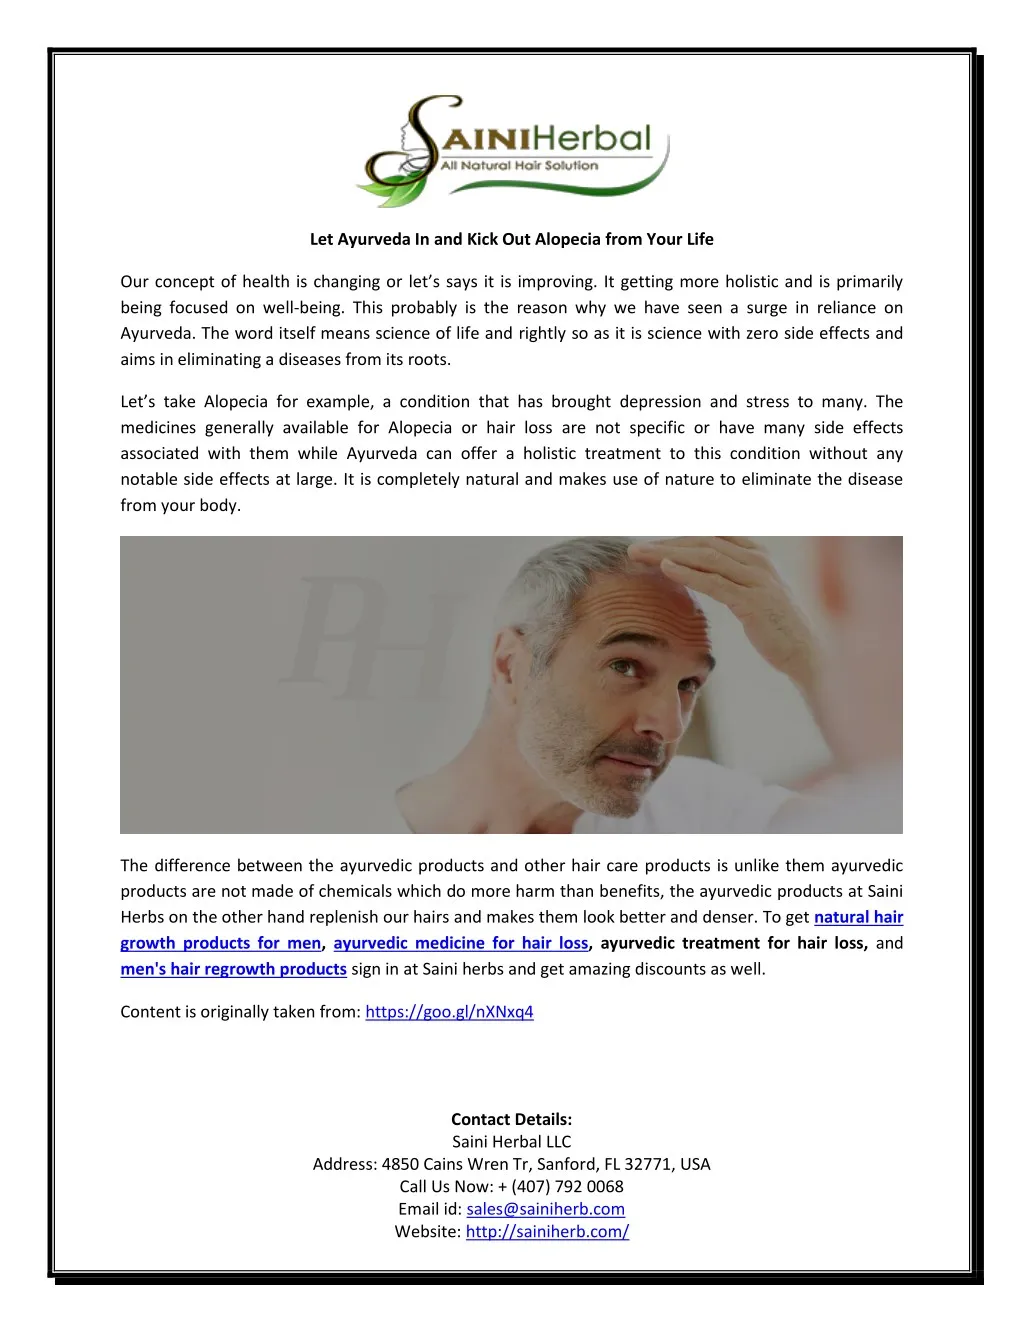 let ayurveda in and kick out alopecia from your